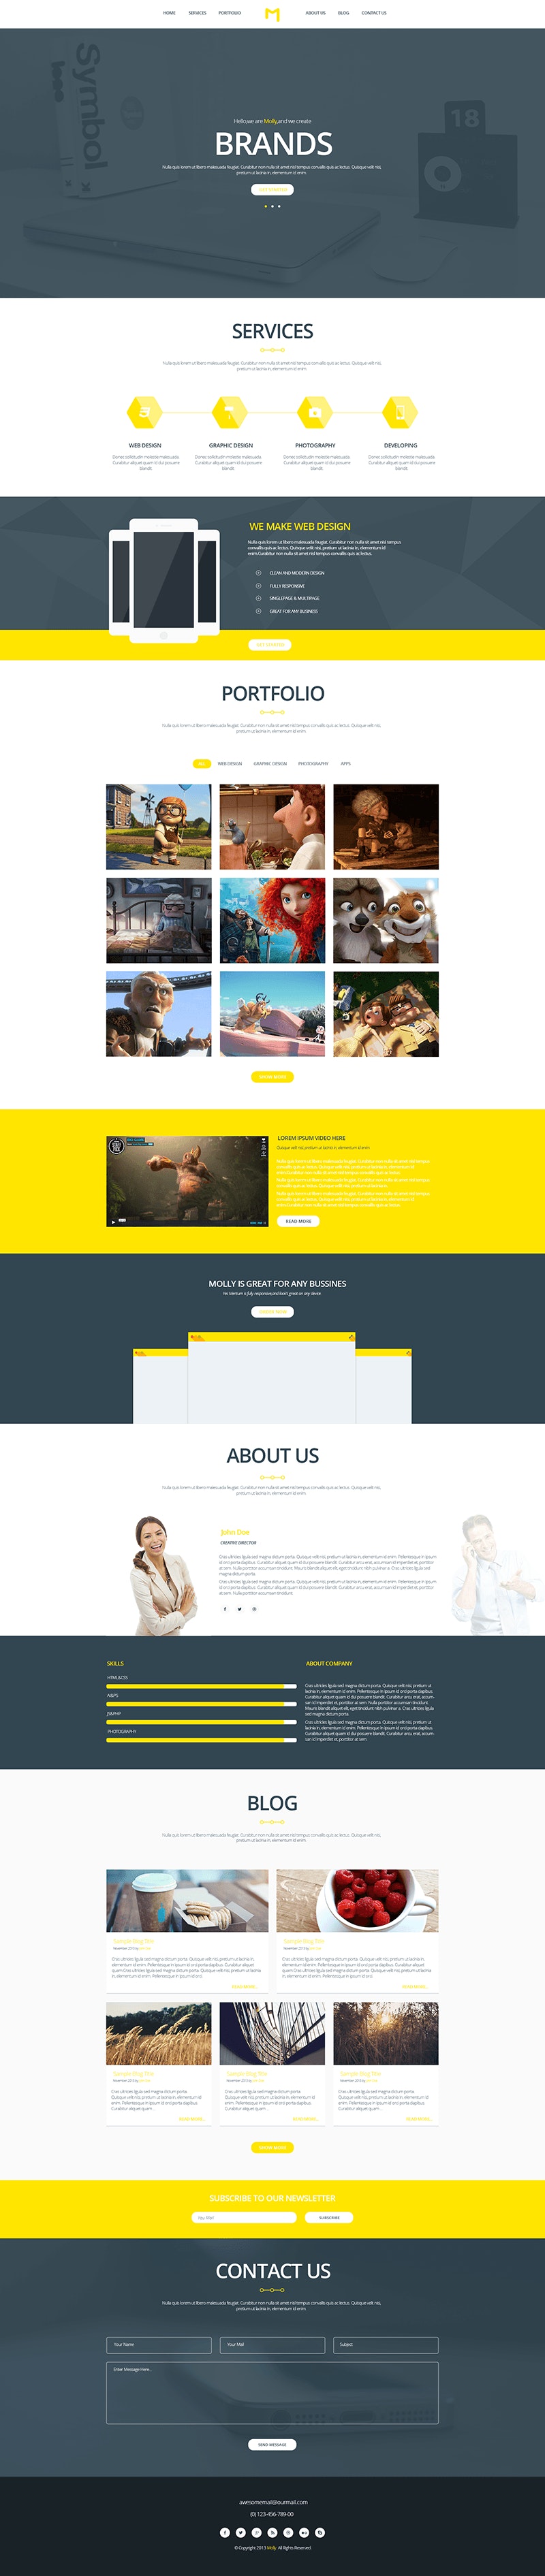 Pin On Psd Webpage Template Riset